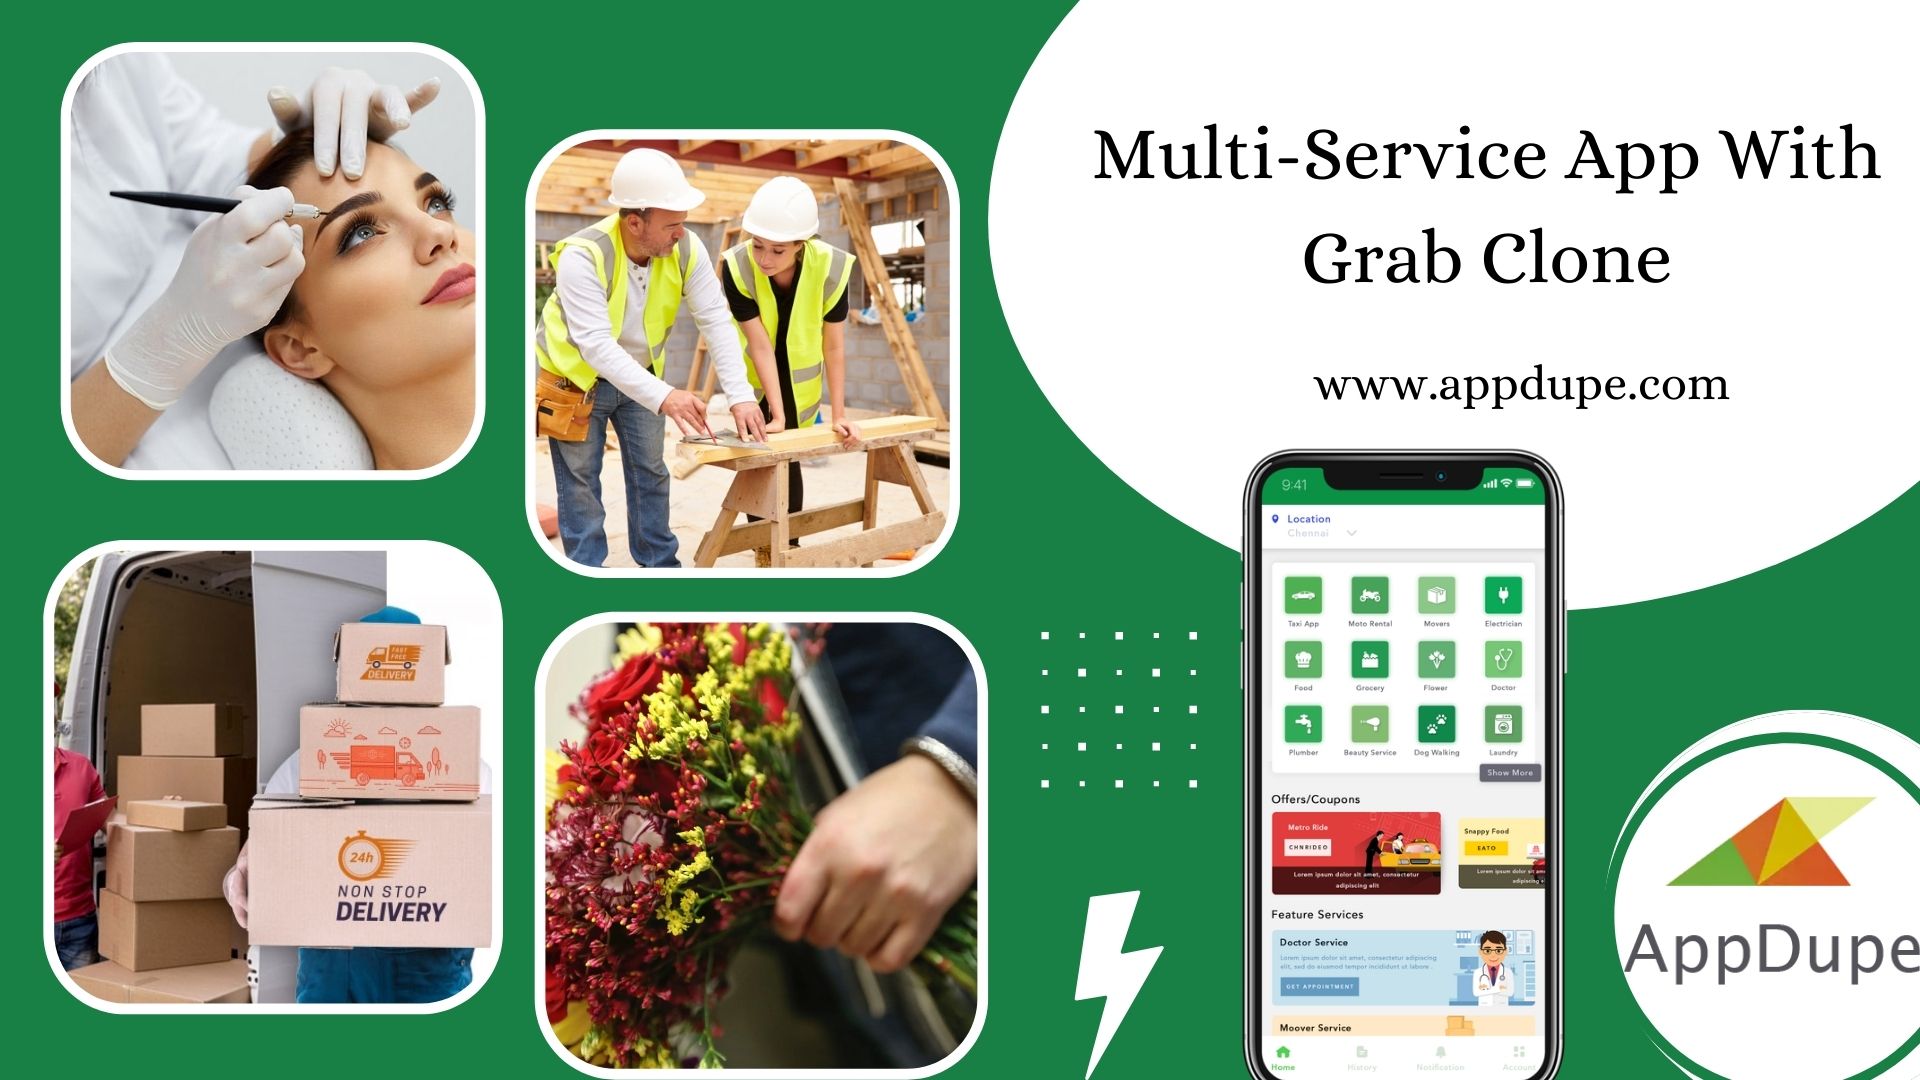 Highlighting features of multi-service Grab clone application